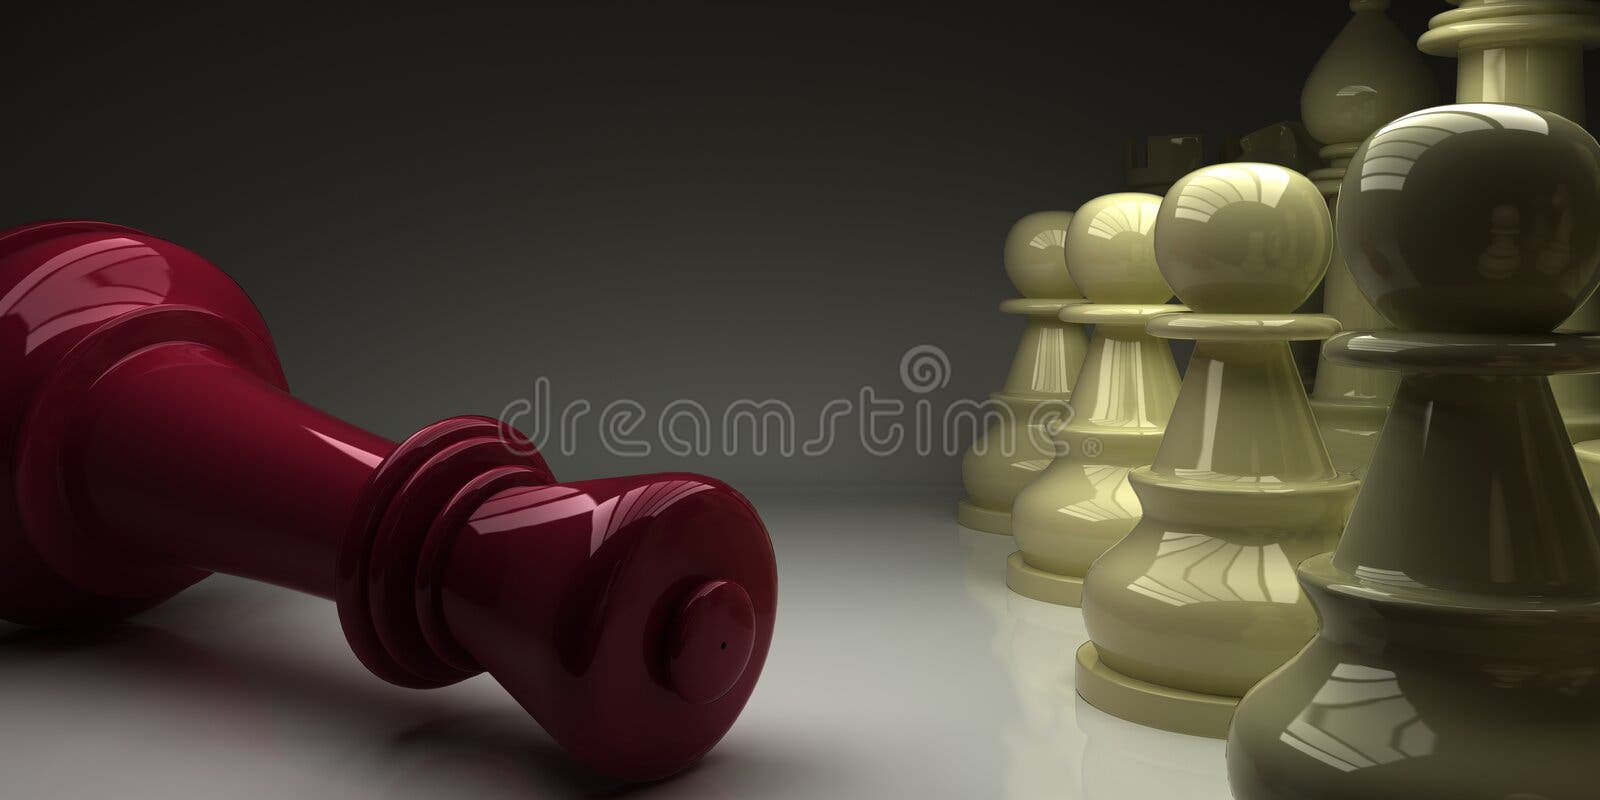 Chessboard King S Toppled Pawns In 3d Illustration Backgrounds